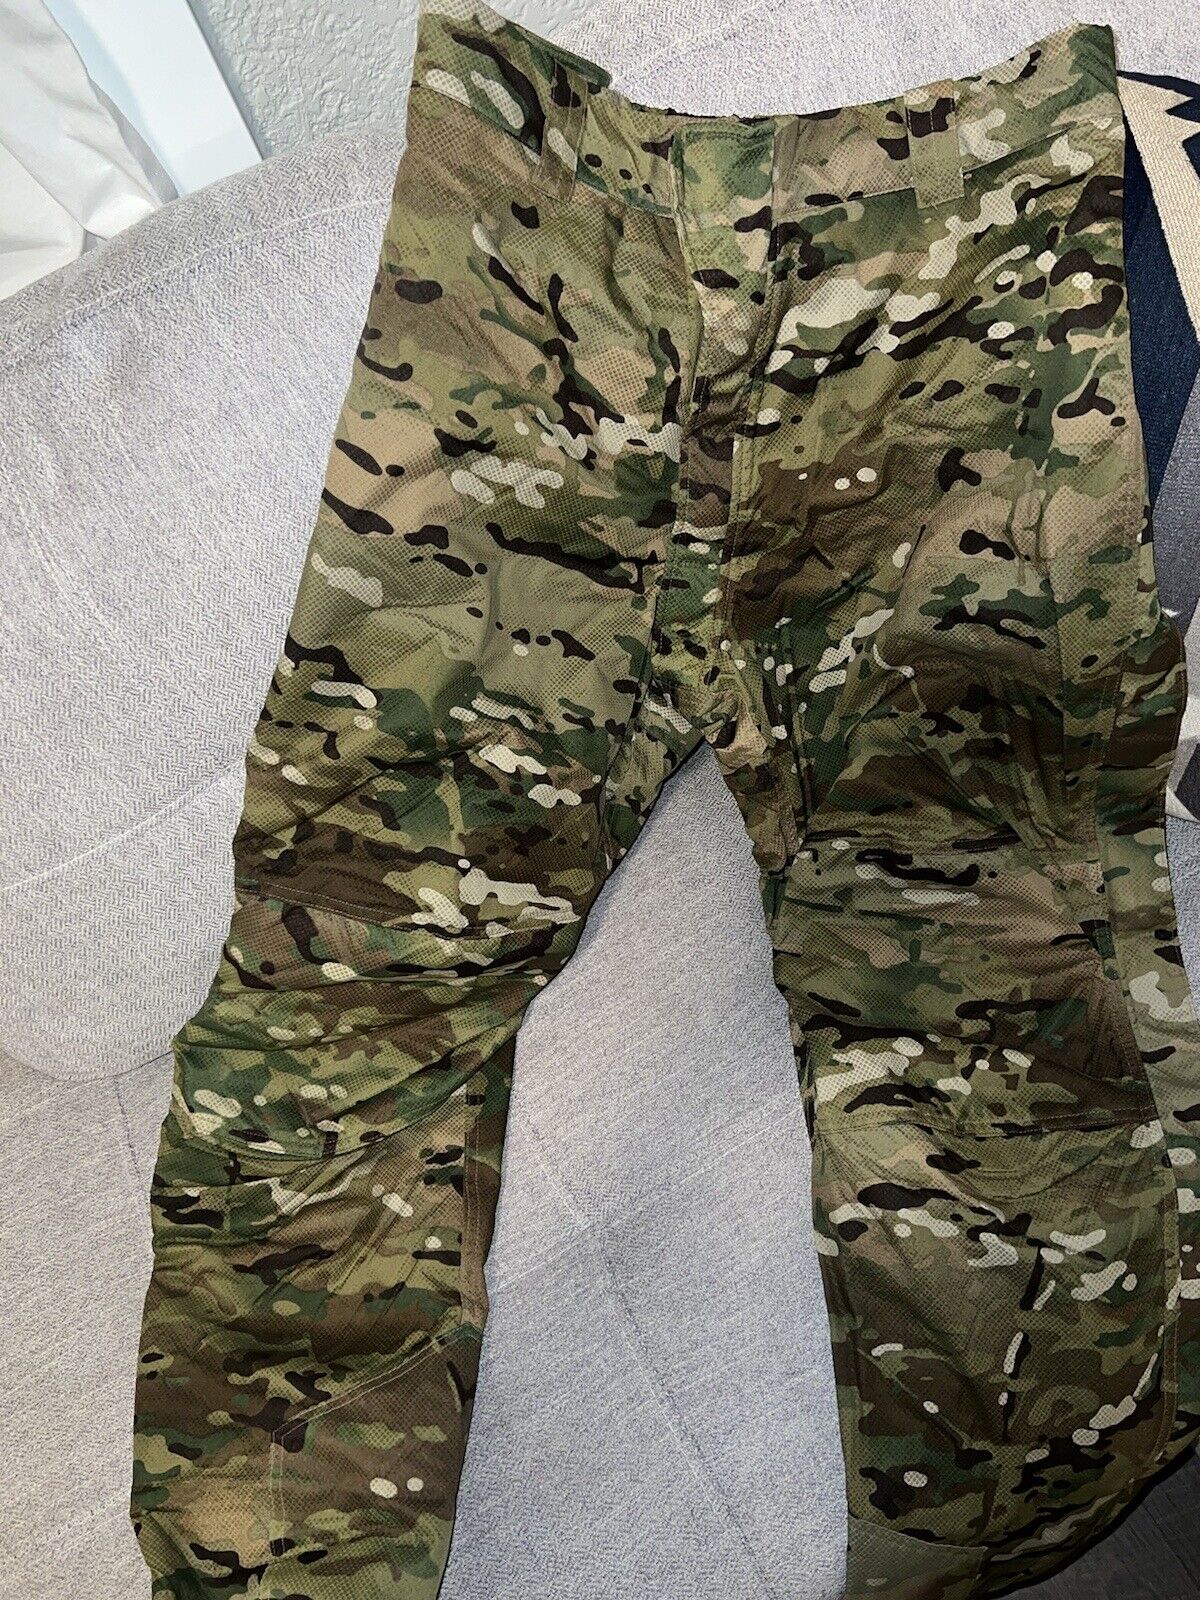 Wild Things FR Gore Pyrad Pants Large - NEW - Multicam